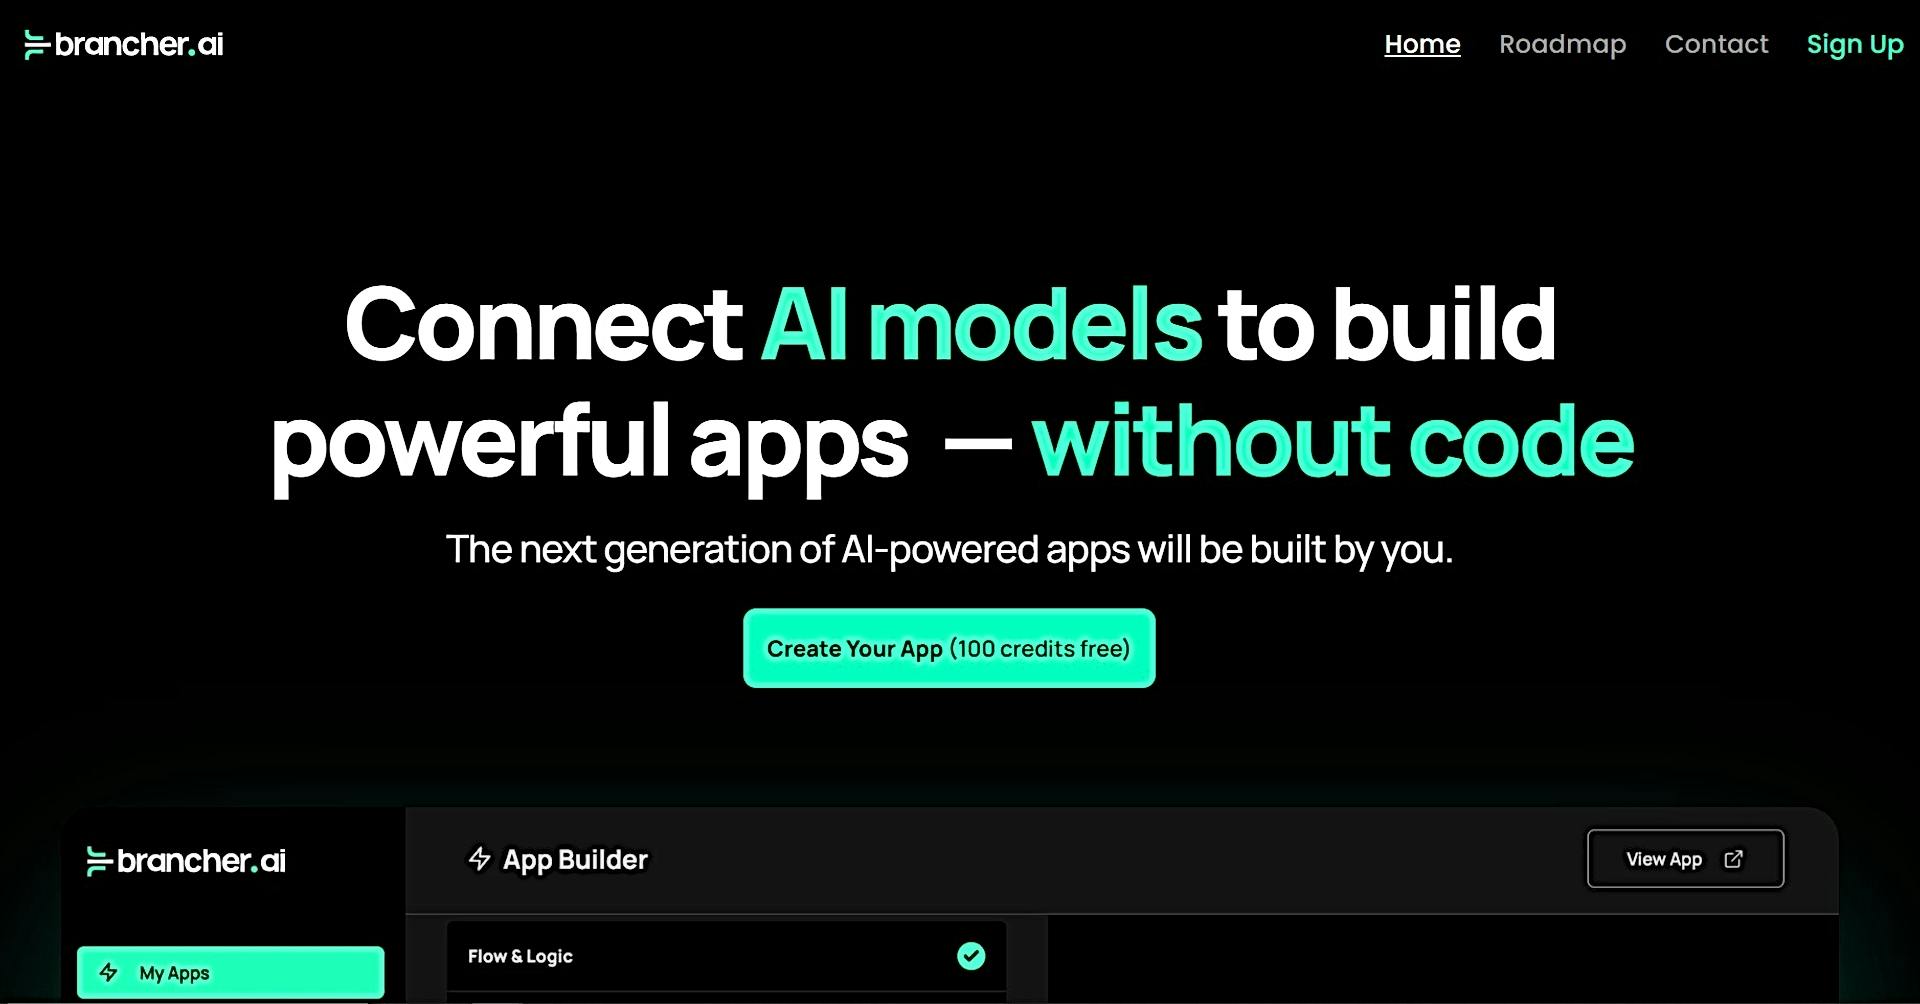 Brancher AI featured